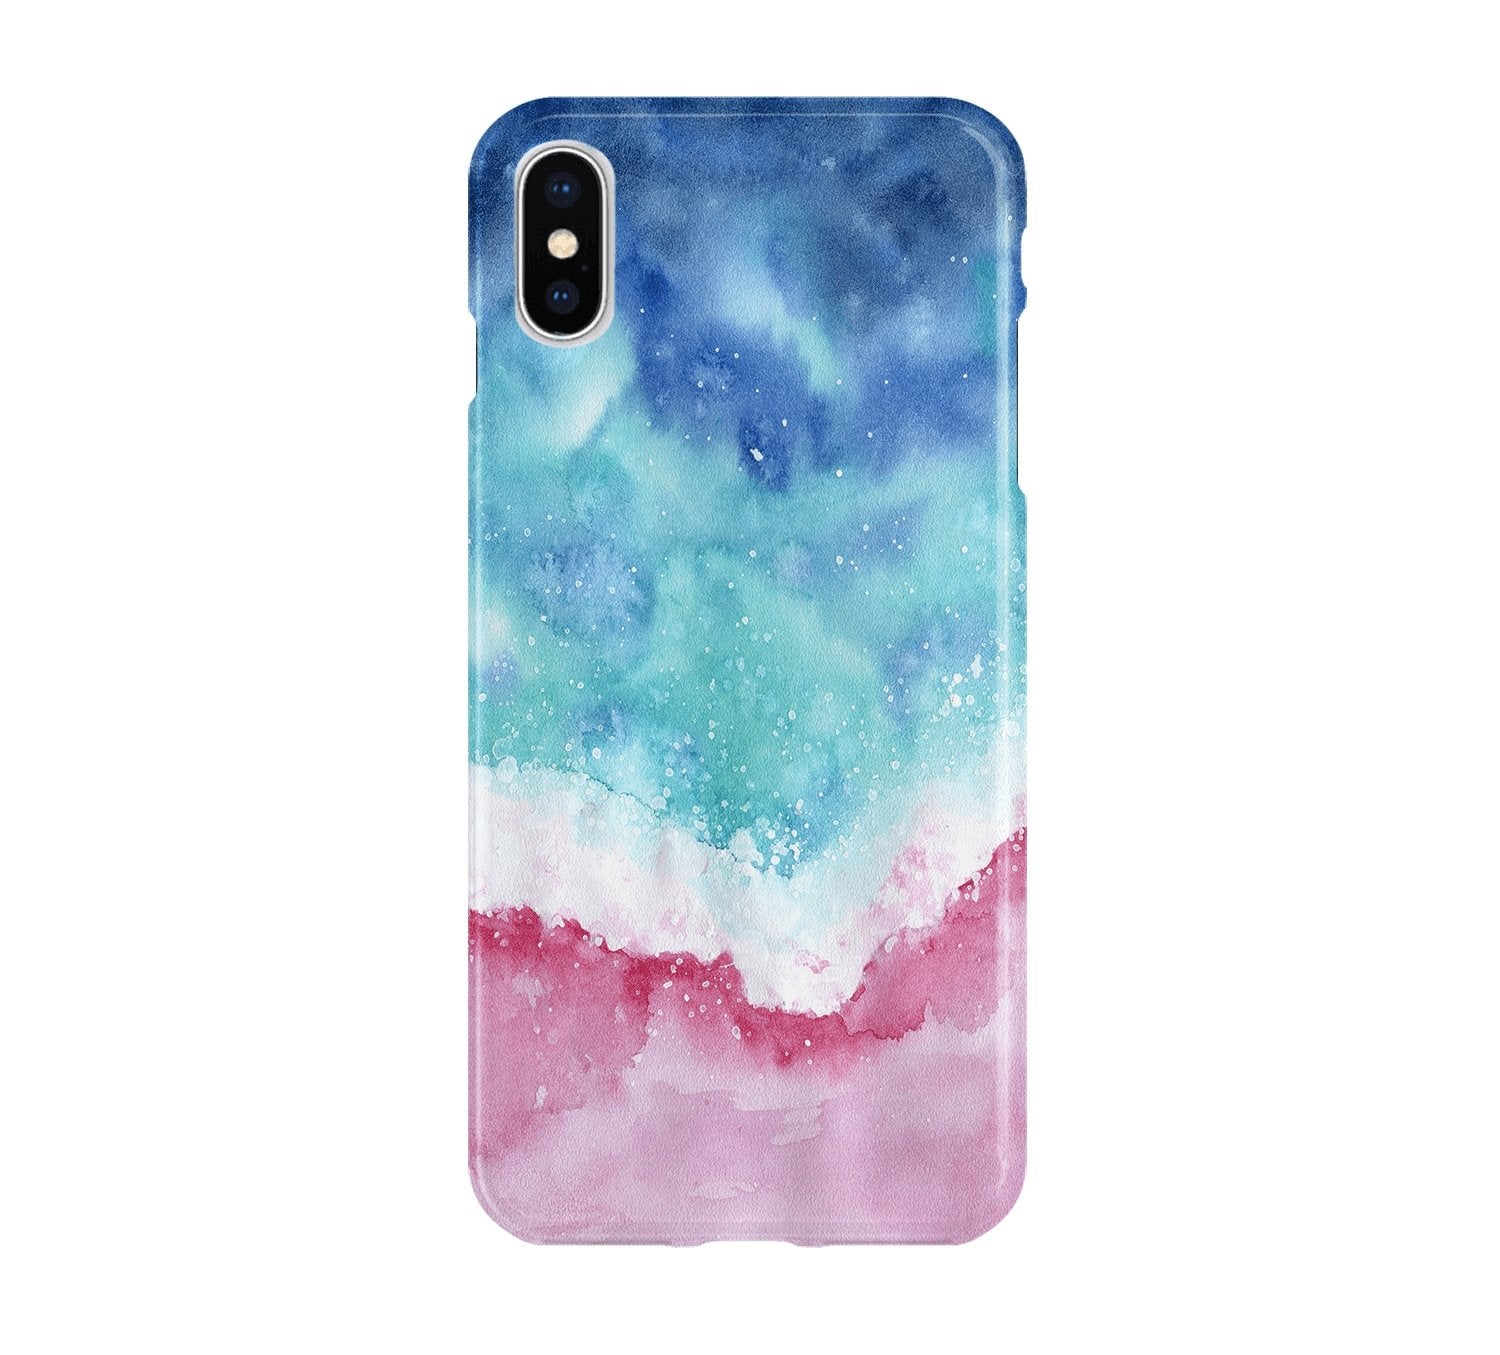 Watercolor Beach - iPhone phone case designs by CaseSwagger